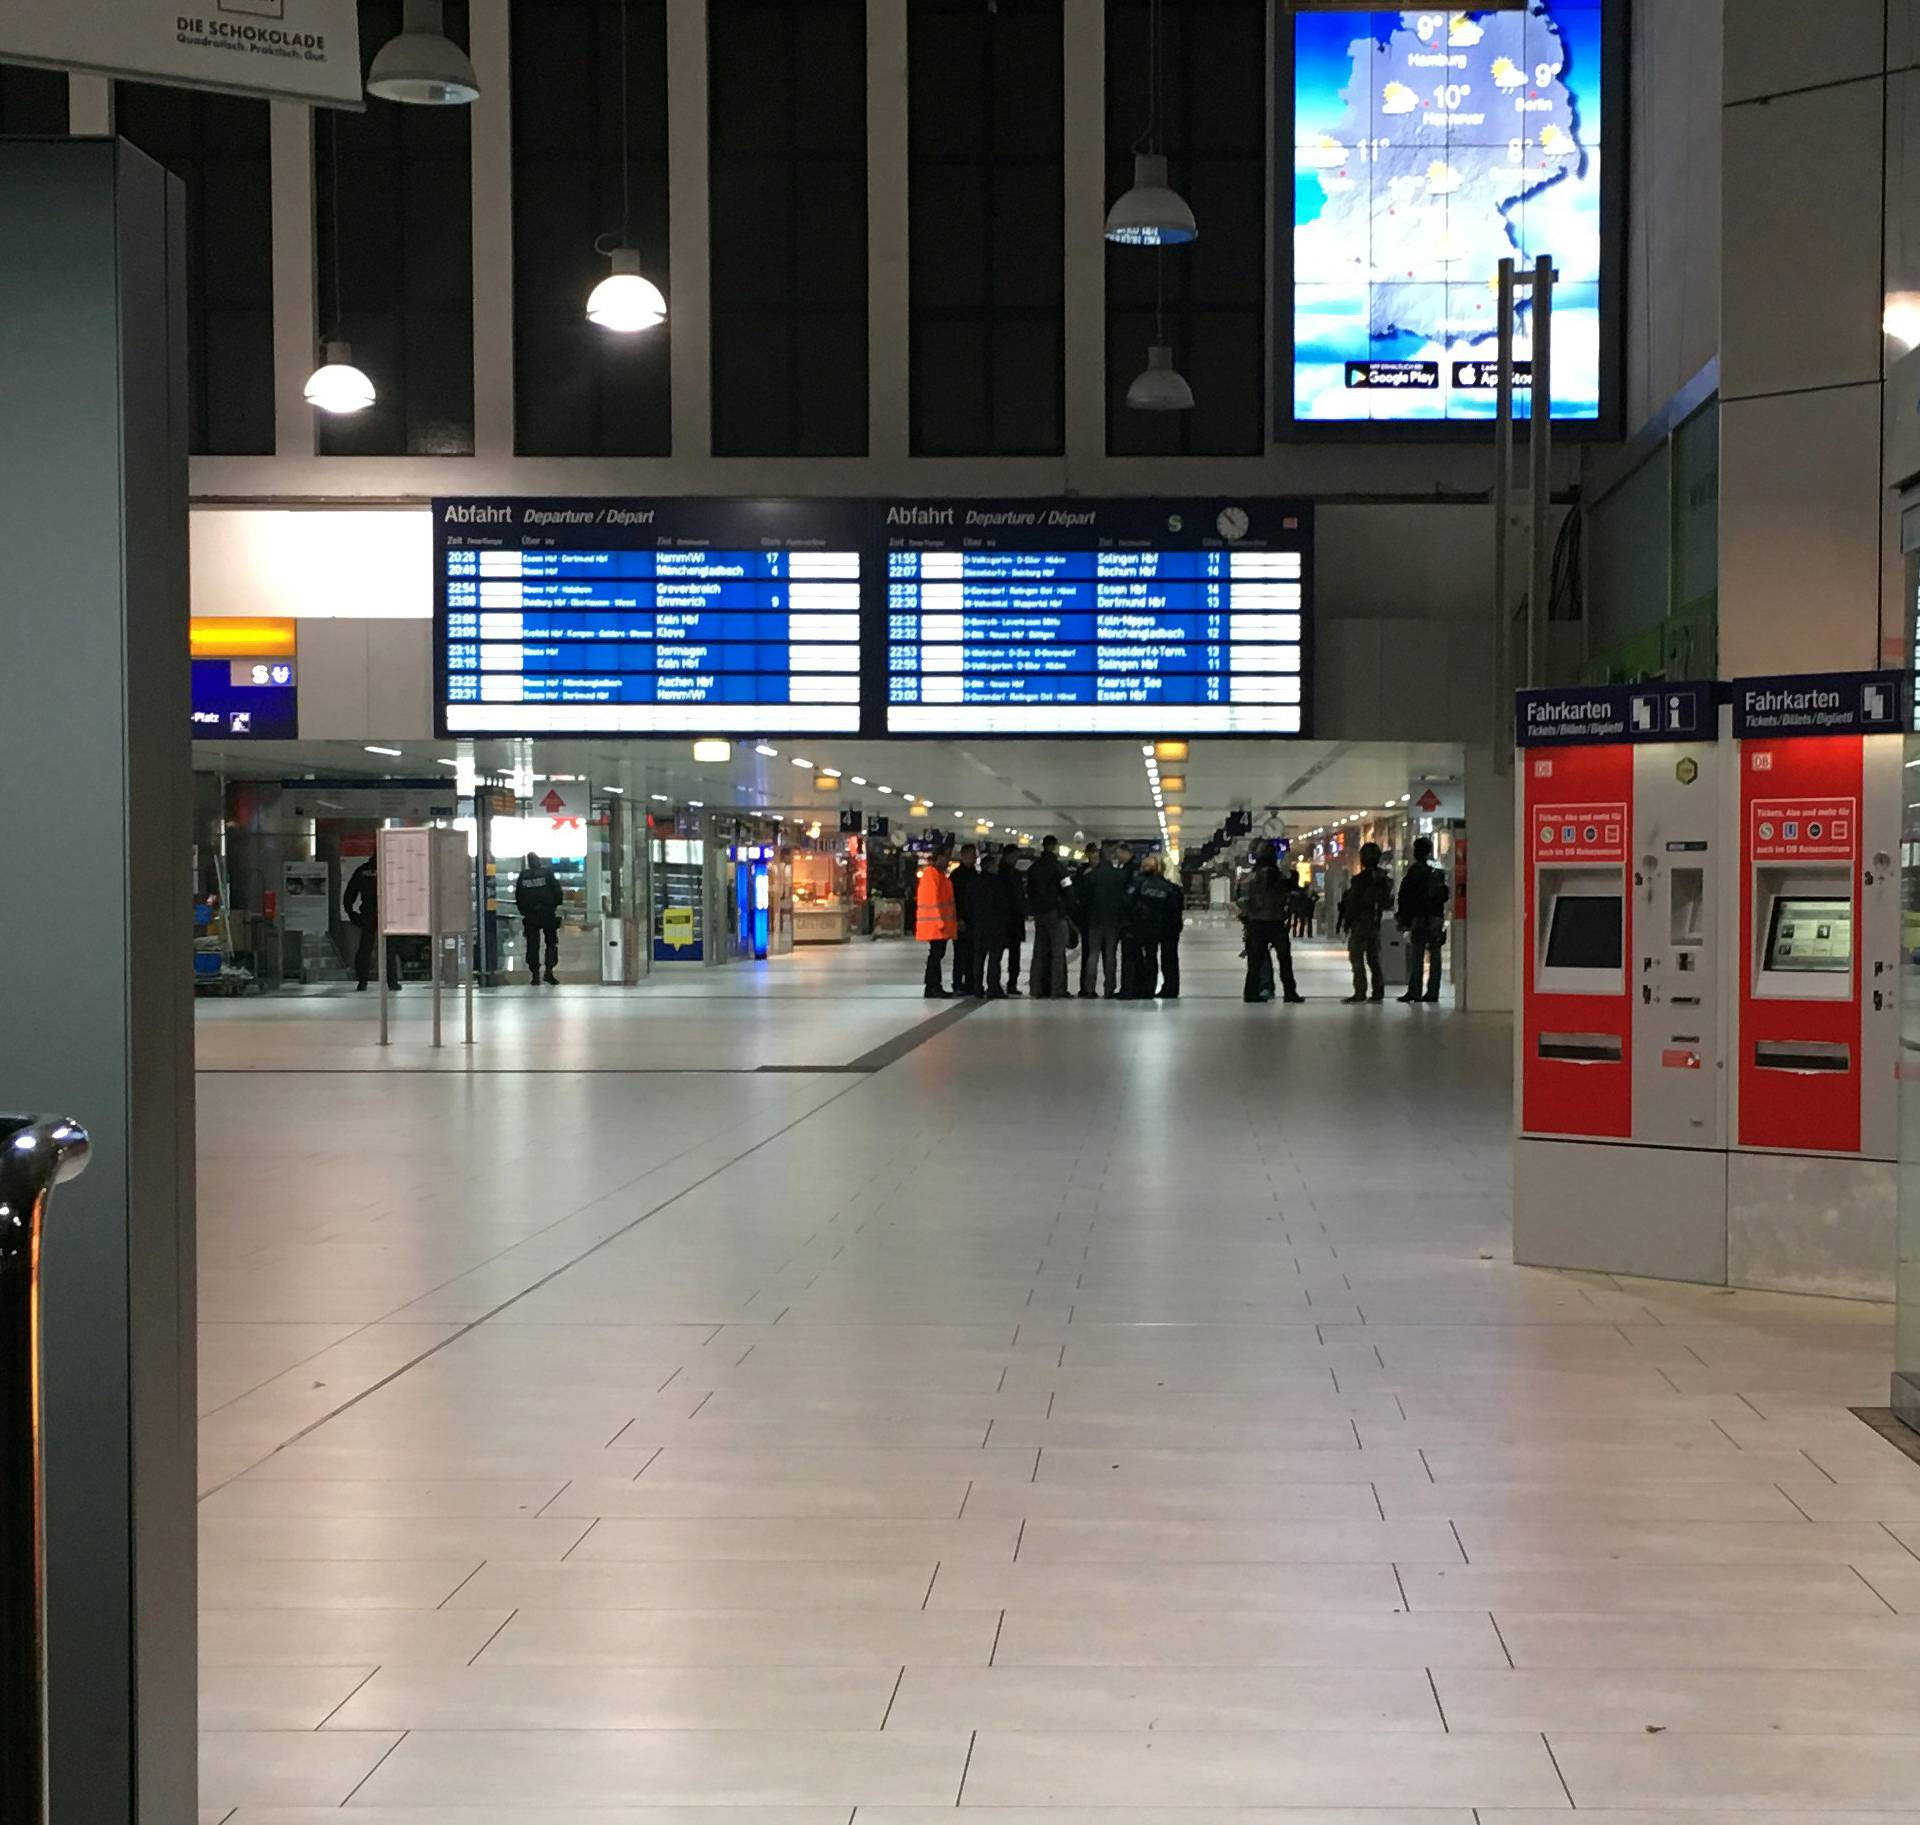 Staff members are pictured inside Dusseldorf train station